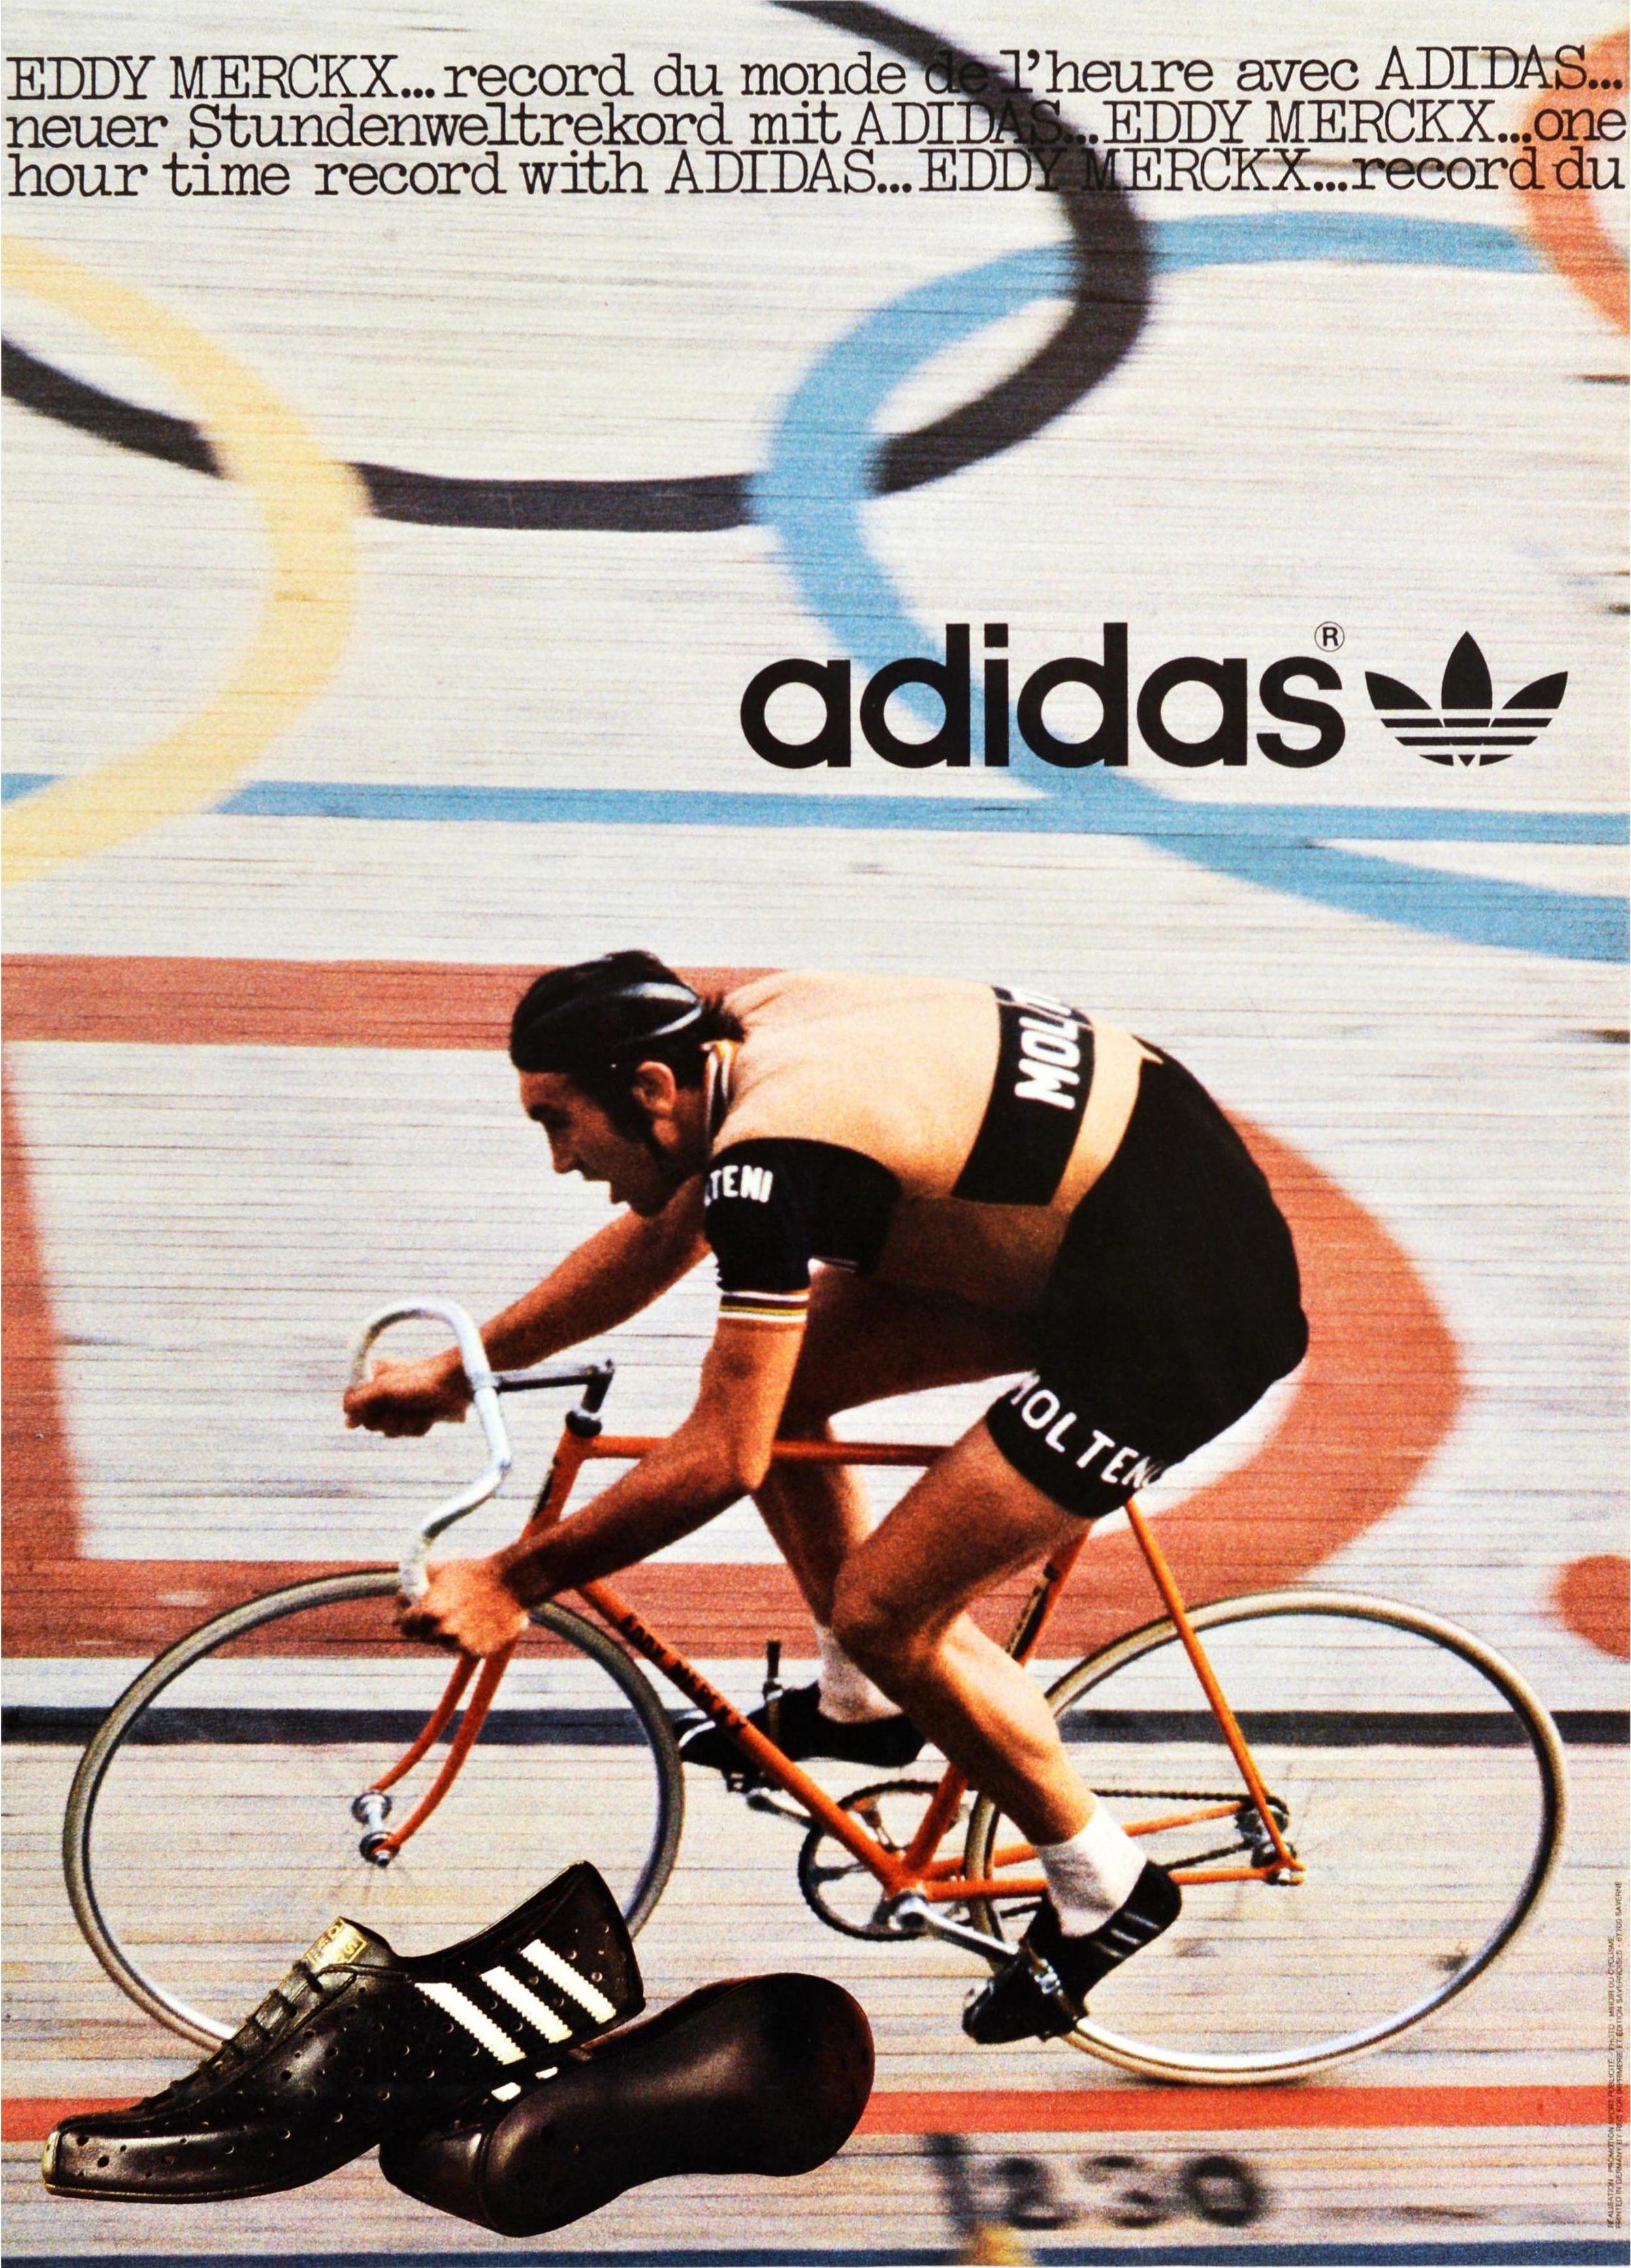 Unknown - Poster Adidas Sport Shoes Eddy Merckx World Record Cyclist Race at 1stDibs